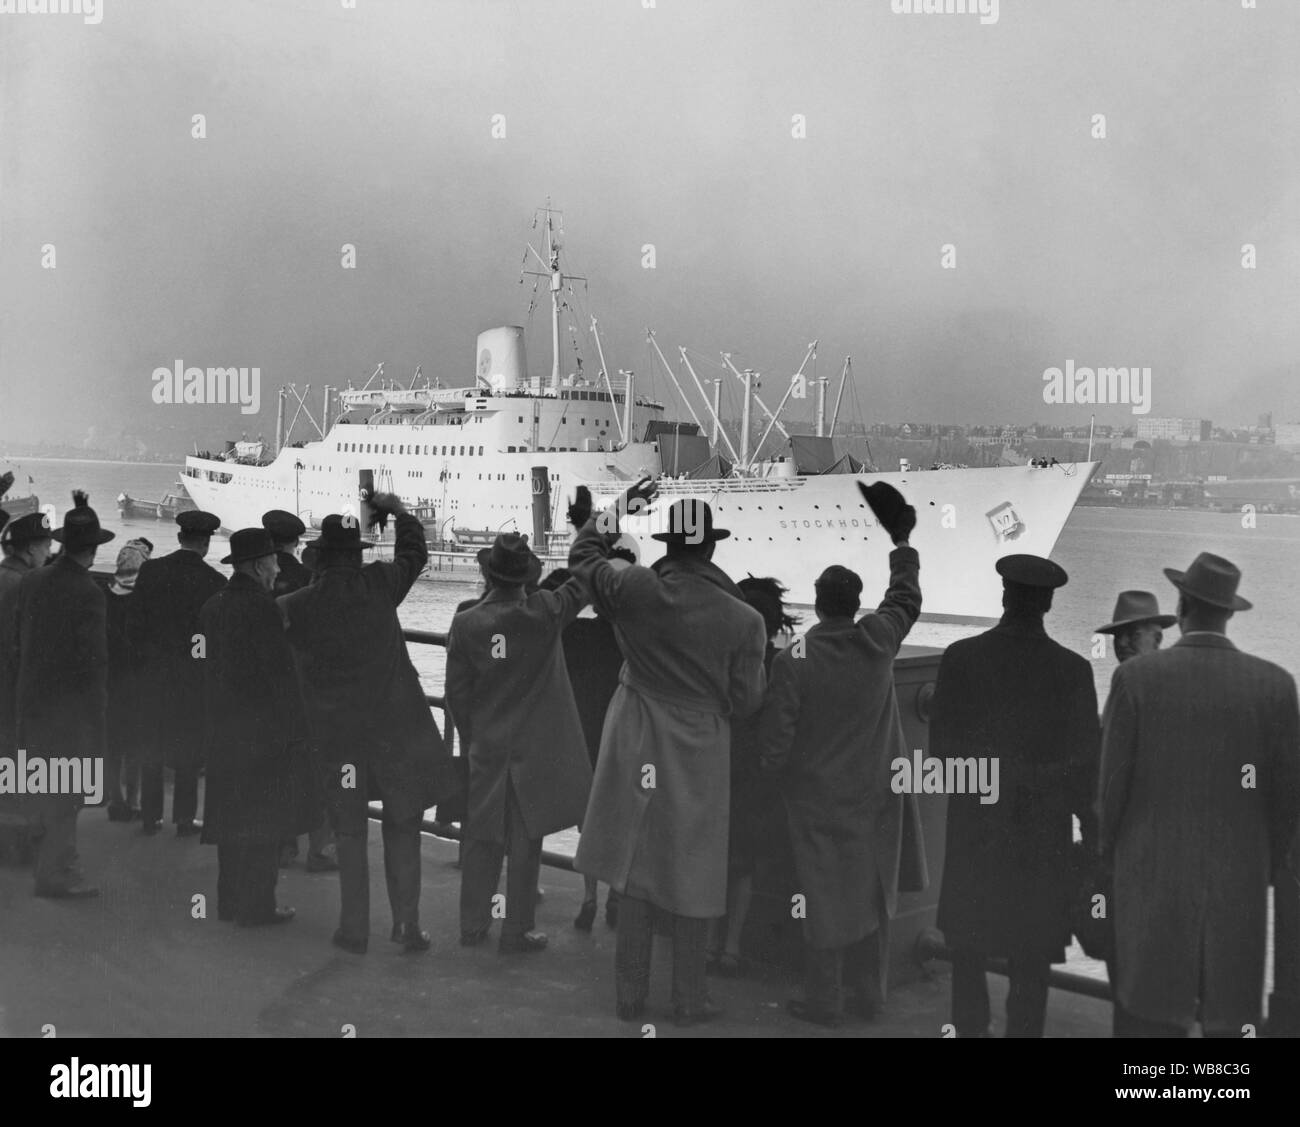 Passenger ship on maiden voyage. M/S Stockholm arrives in the port of New York on march 1 1948 from Gothenburg. People are standing and waving at from the quay. Stock Photo